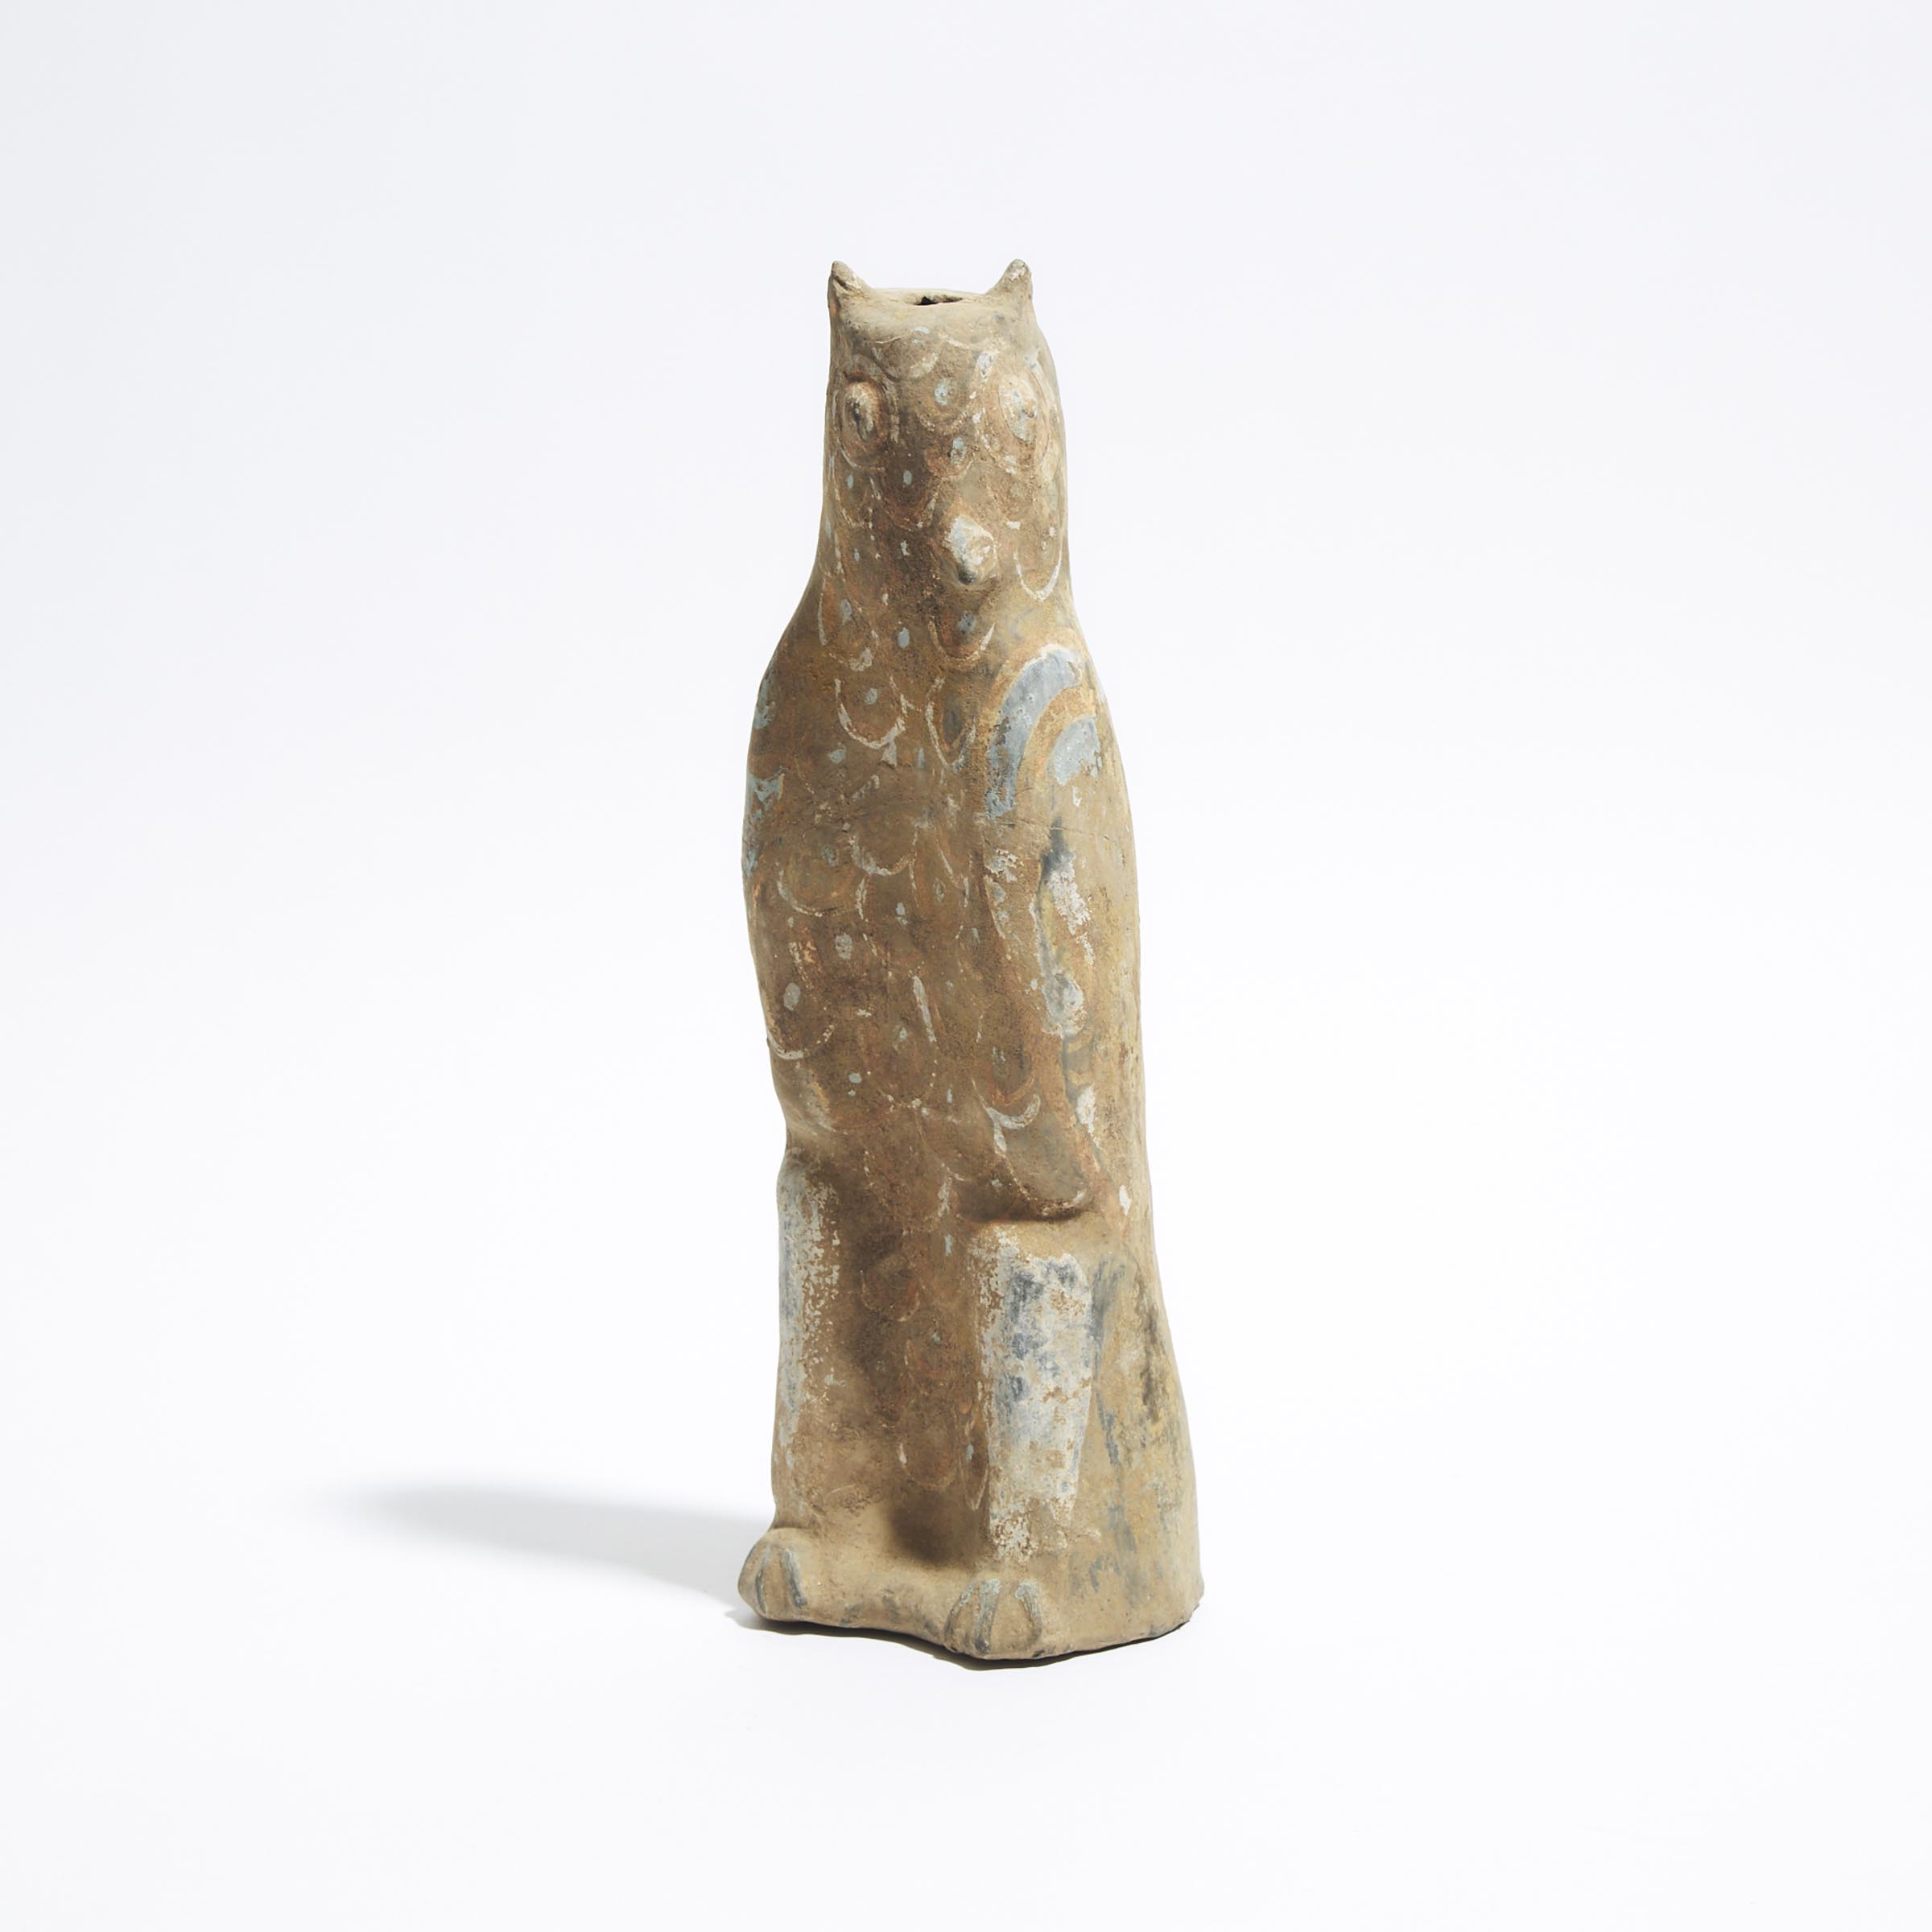 A Painted Pottery Figure of an Owl, Possibly Han Dynasty